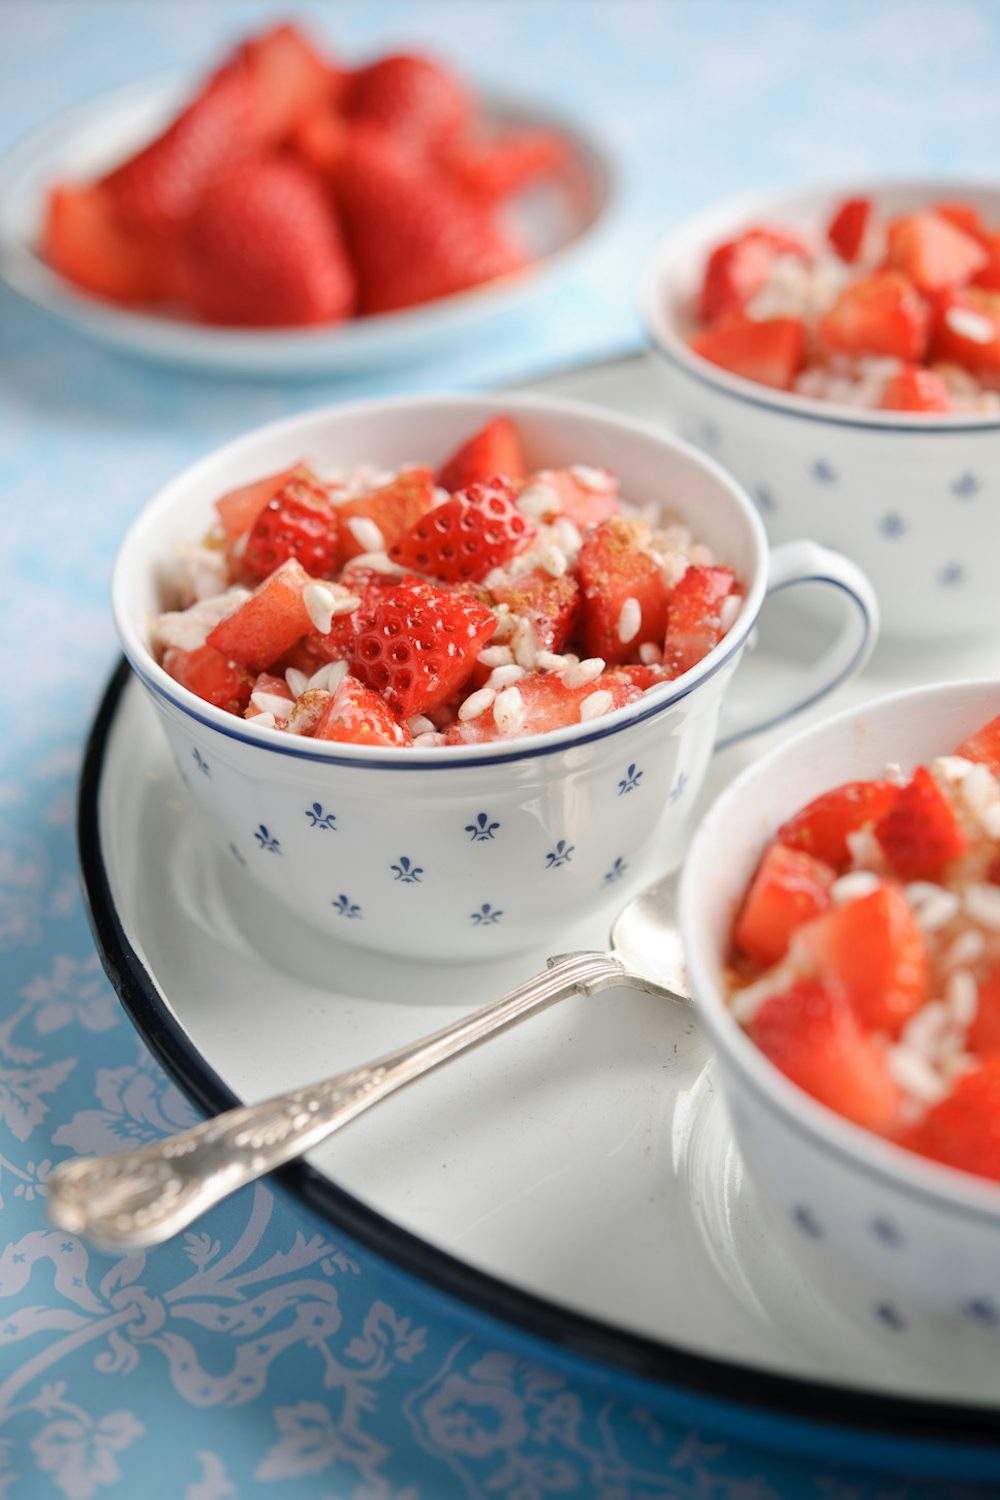 Strawberry Oven Baked Risotto